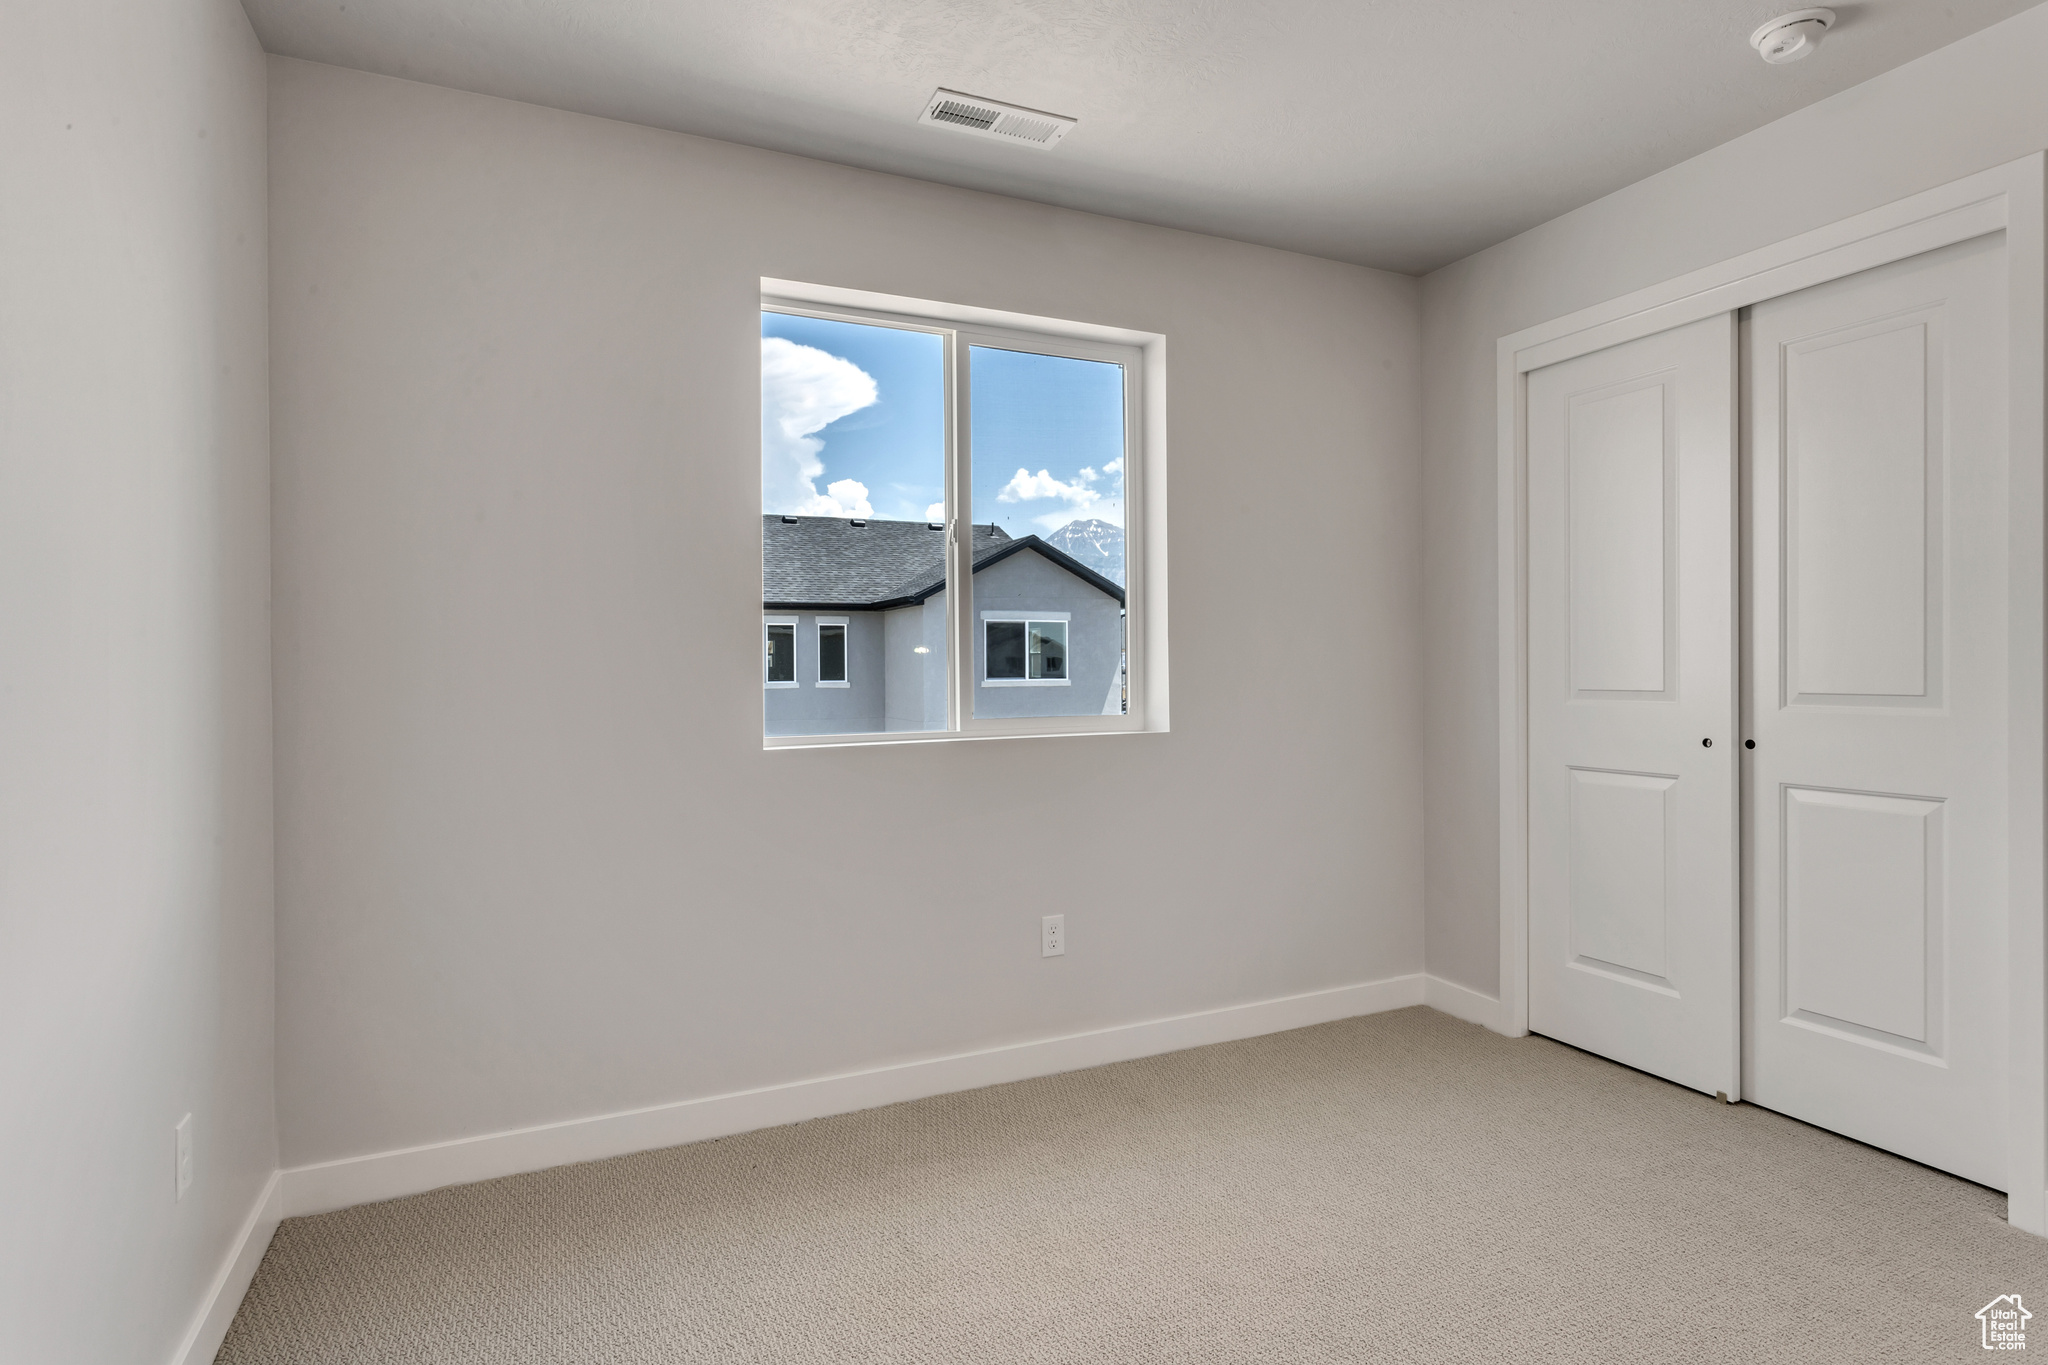 PHOTOS FROM A SIMILAR HOME. COLORS AND SELECTIONS WILL VARY. Bedroom